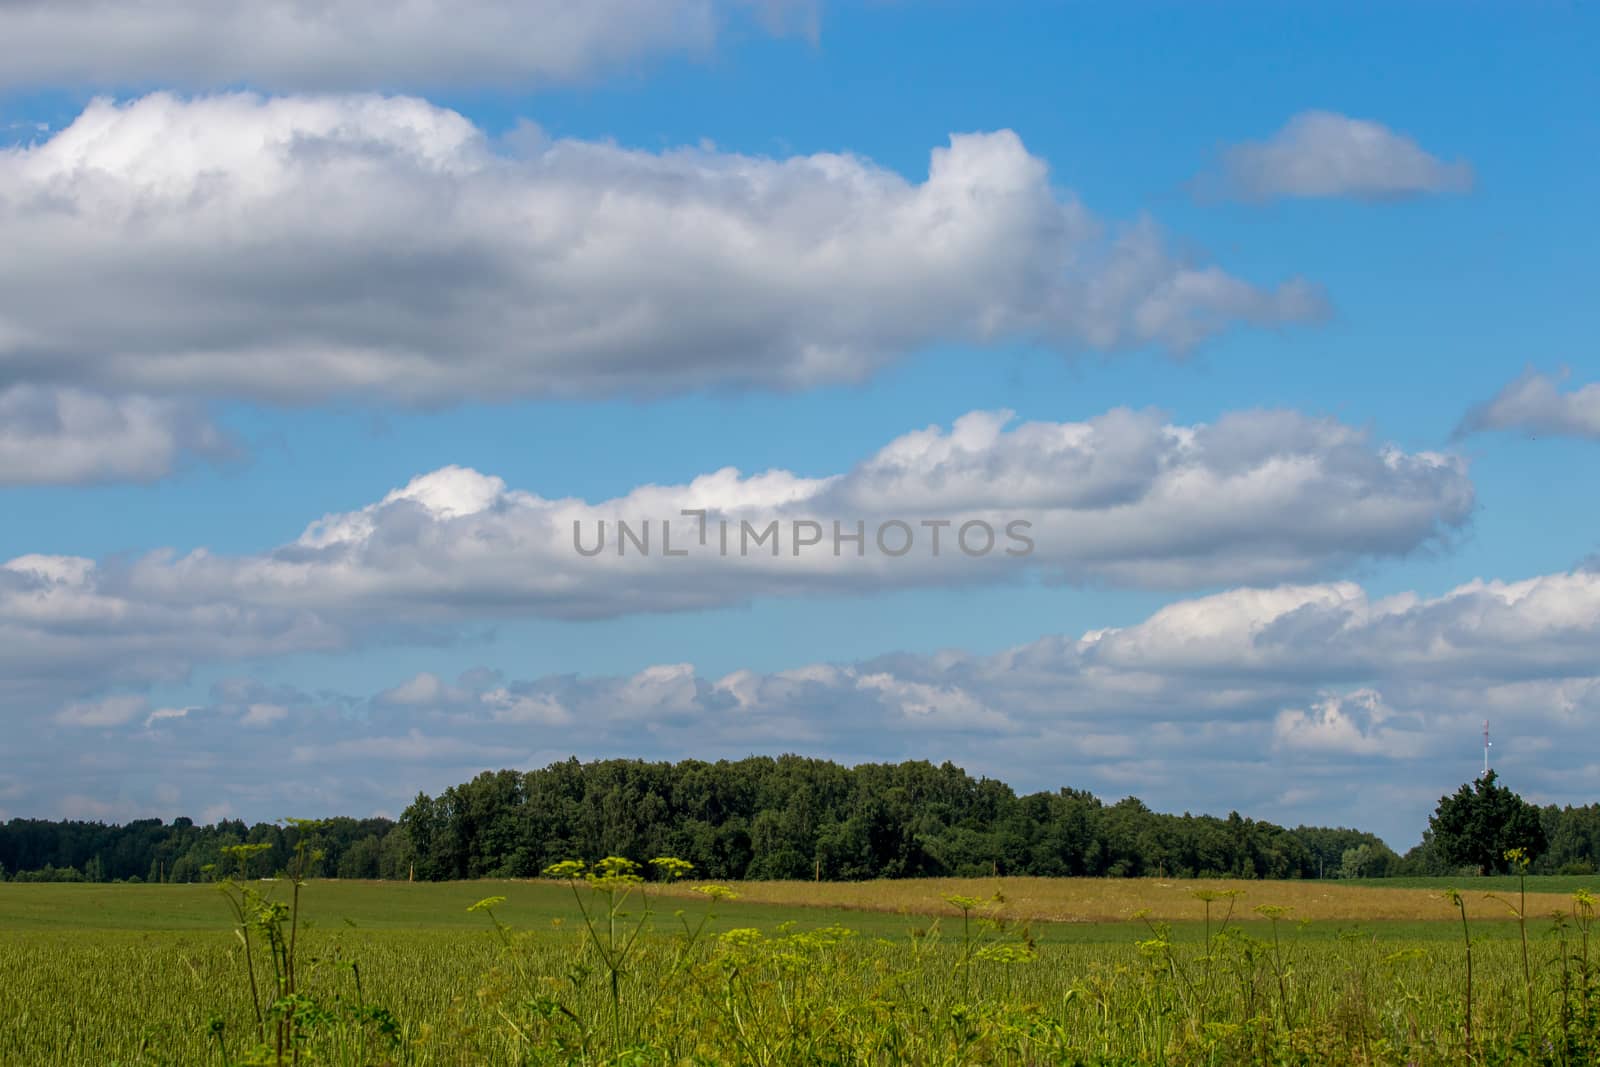 Green field with cereal and forest on the back, against a blue sky. Spring landscape with cornfield, wood and cloudy blue sky. Classic rural landscape in Latvia.